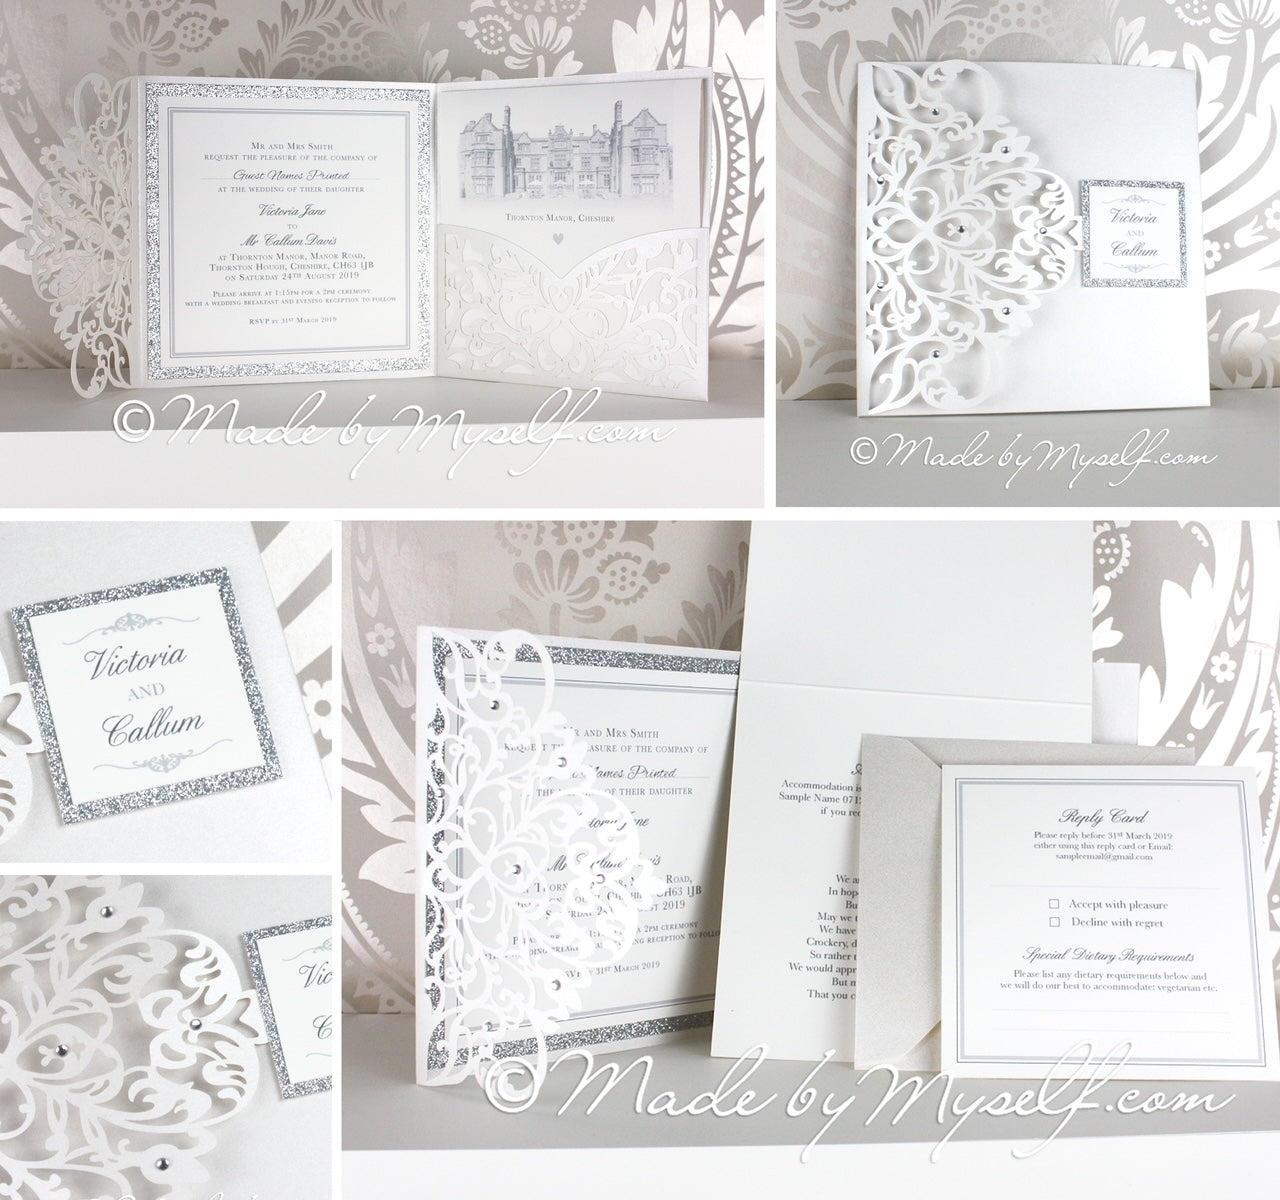 Wisteria Laser Cut Pocket fold Wedding Invitation in Pearlised White with silver glitter inserts and name tag panel  ImagineDIY   